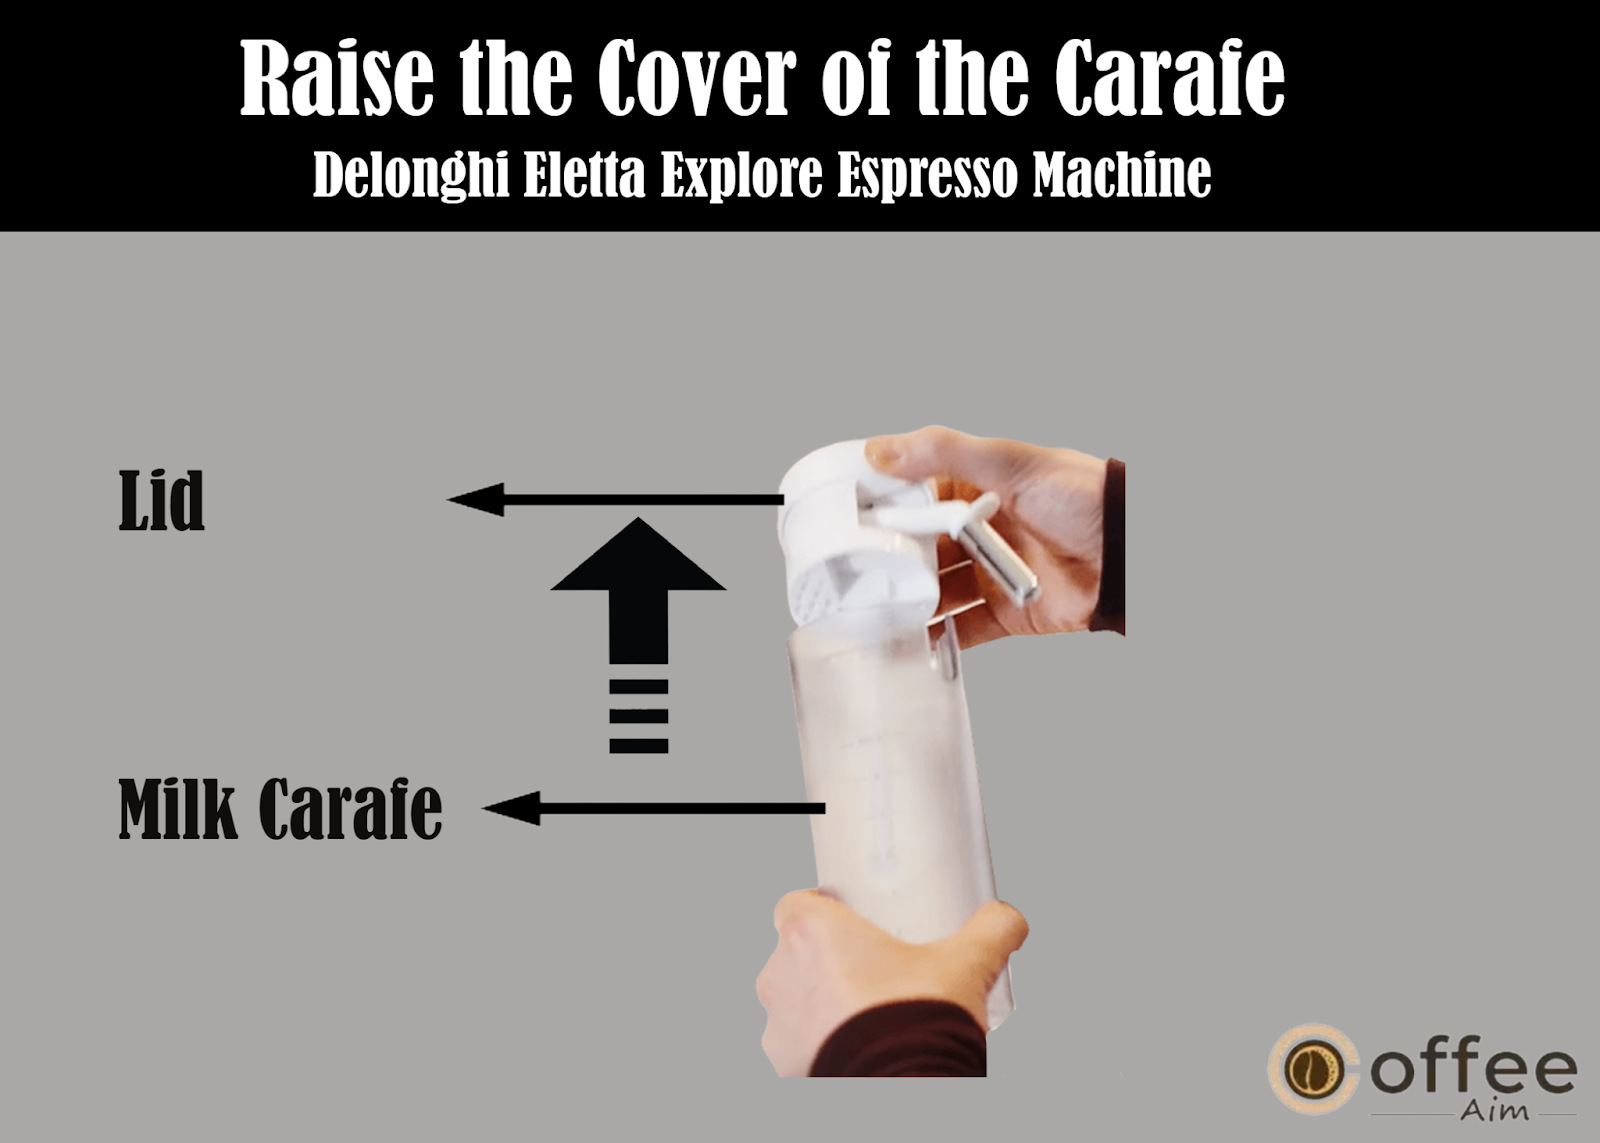 The image illustrates how to lift the carafe lid of the "Delonghi Eletta Explore Espresso Machine," a key step detailed in the article "How to Use the Delonghi Eletta Explore Espresso Machine."